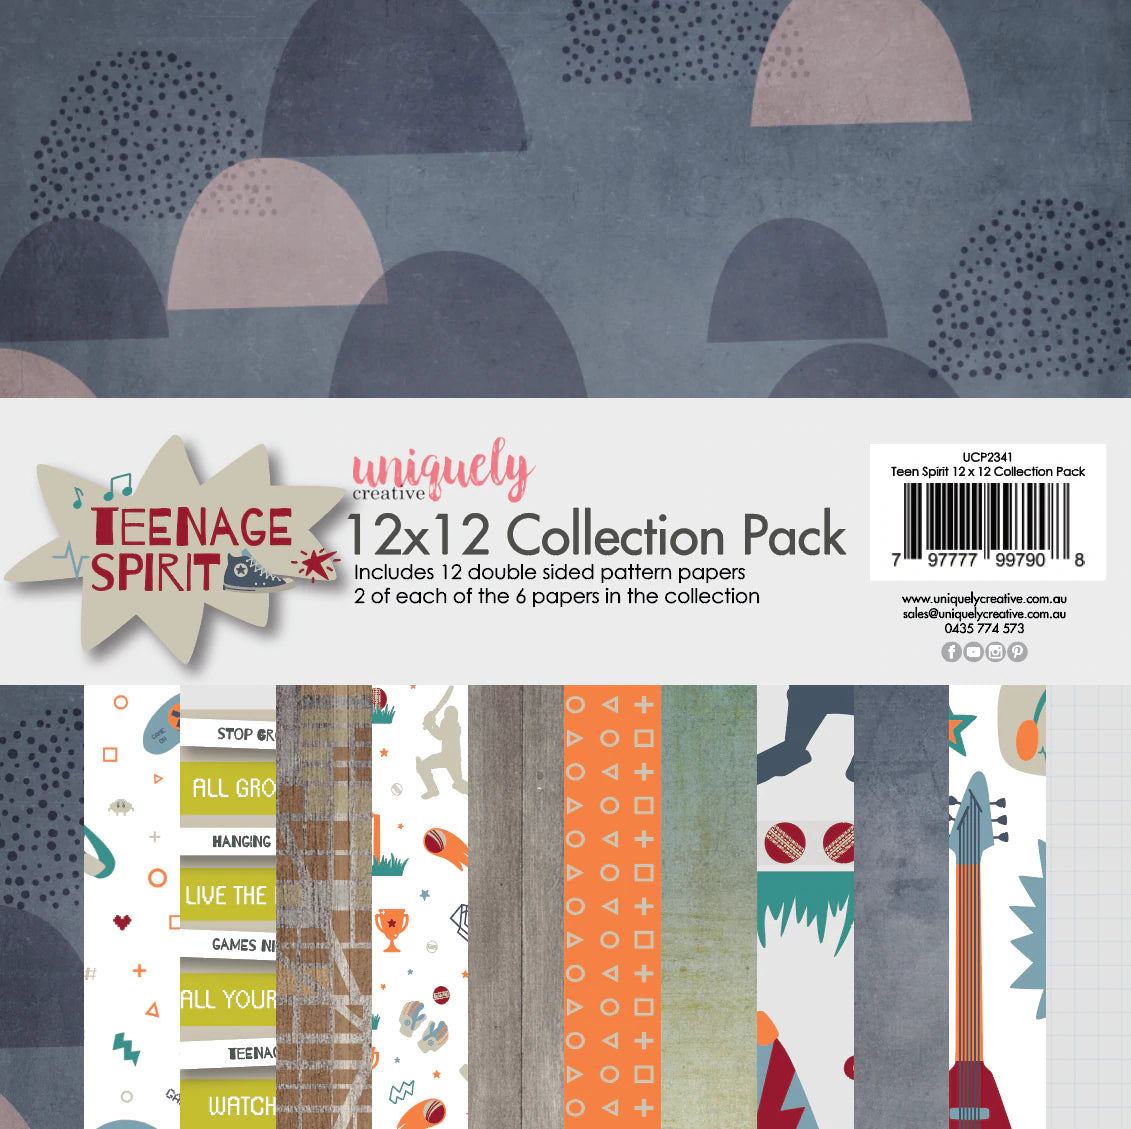 Uniquely Creative - 12x12 Collection Pack - Teen Spirit